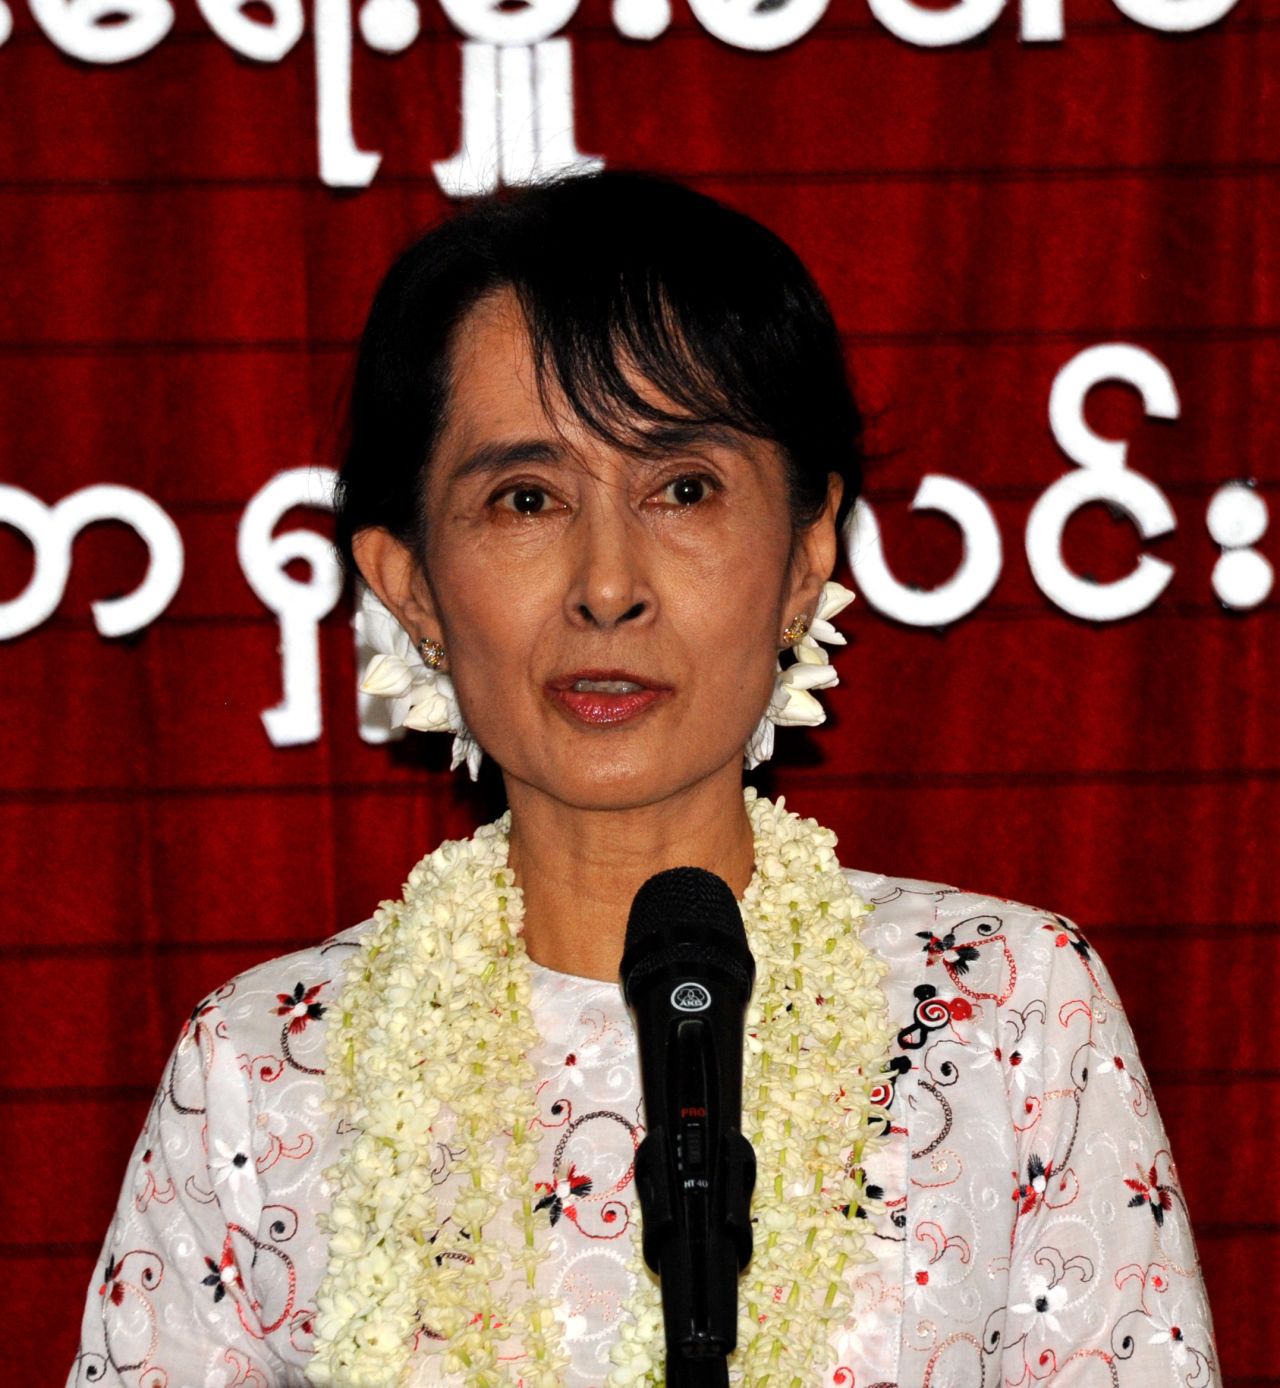 Myanmar democracy icon Aung San Suu Kyi was awarded the prize while under house arrest.